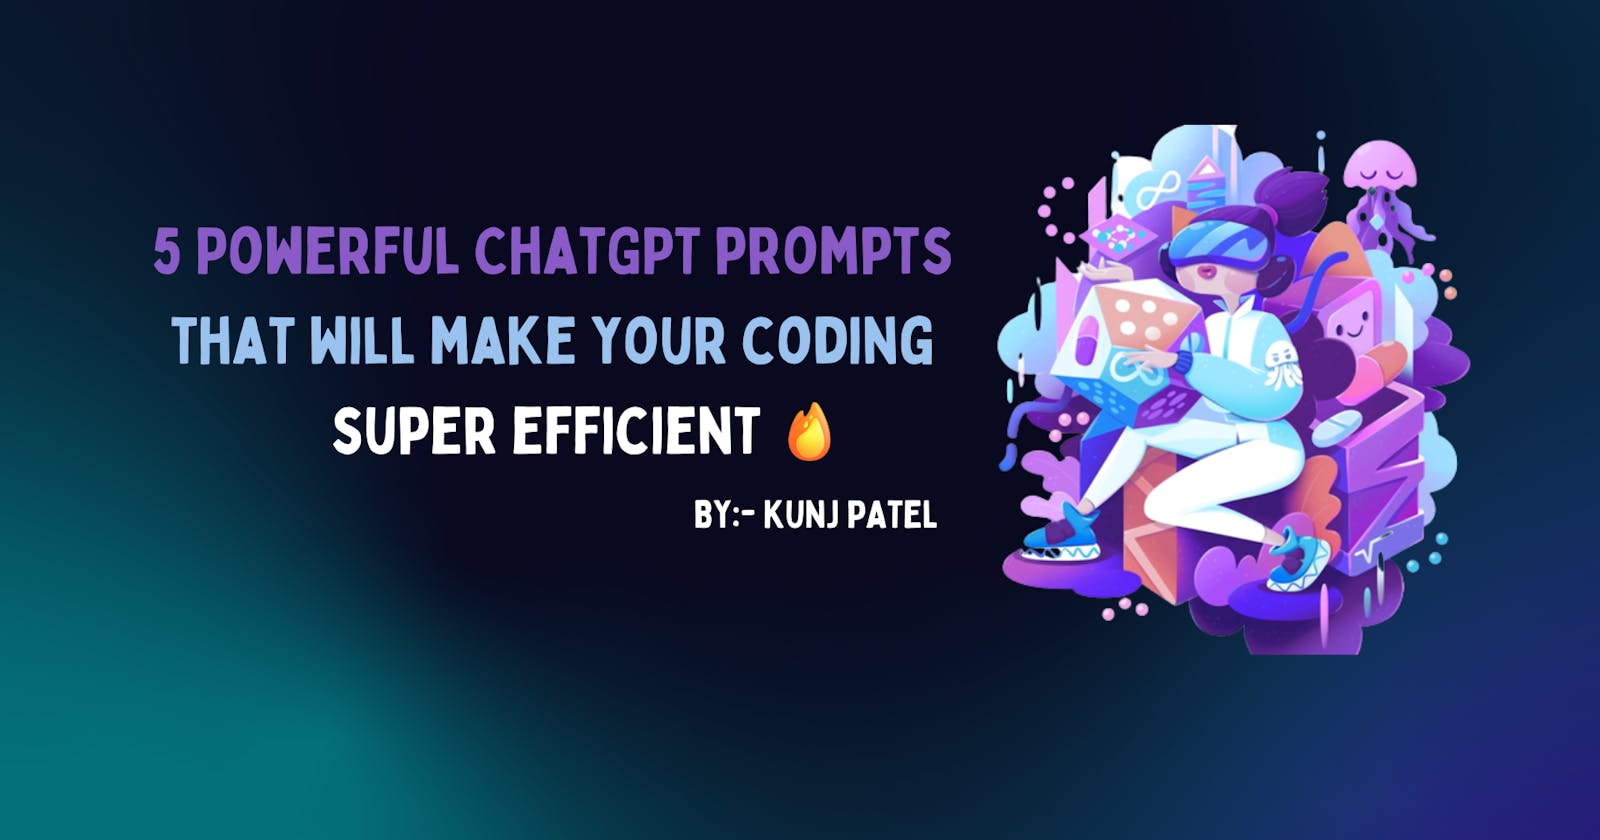 5 Powerful ChatGPT prompts that will make your coding super efficient 🔥